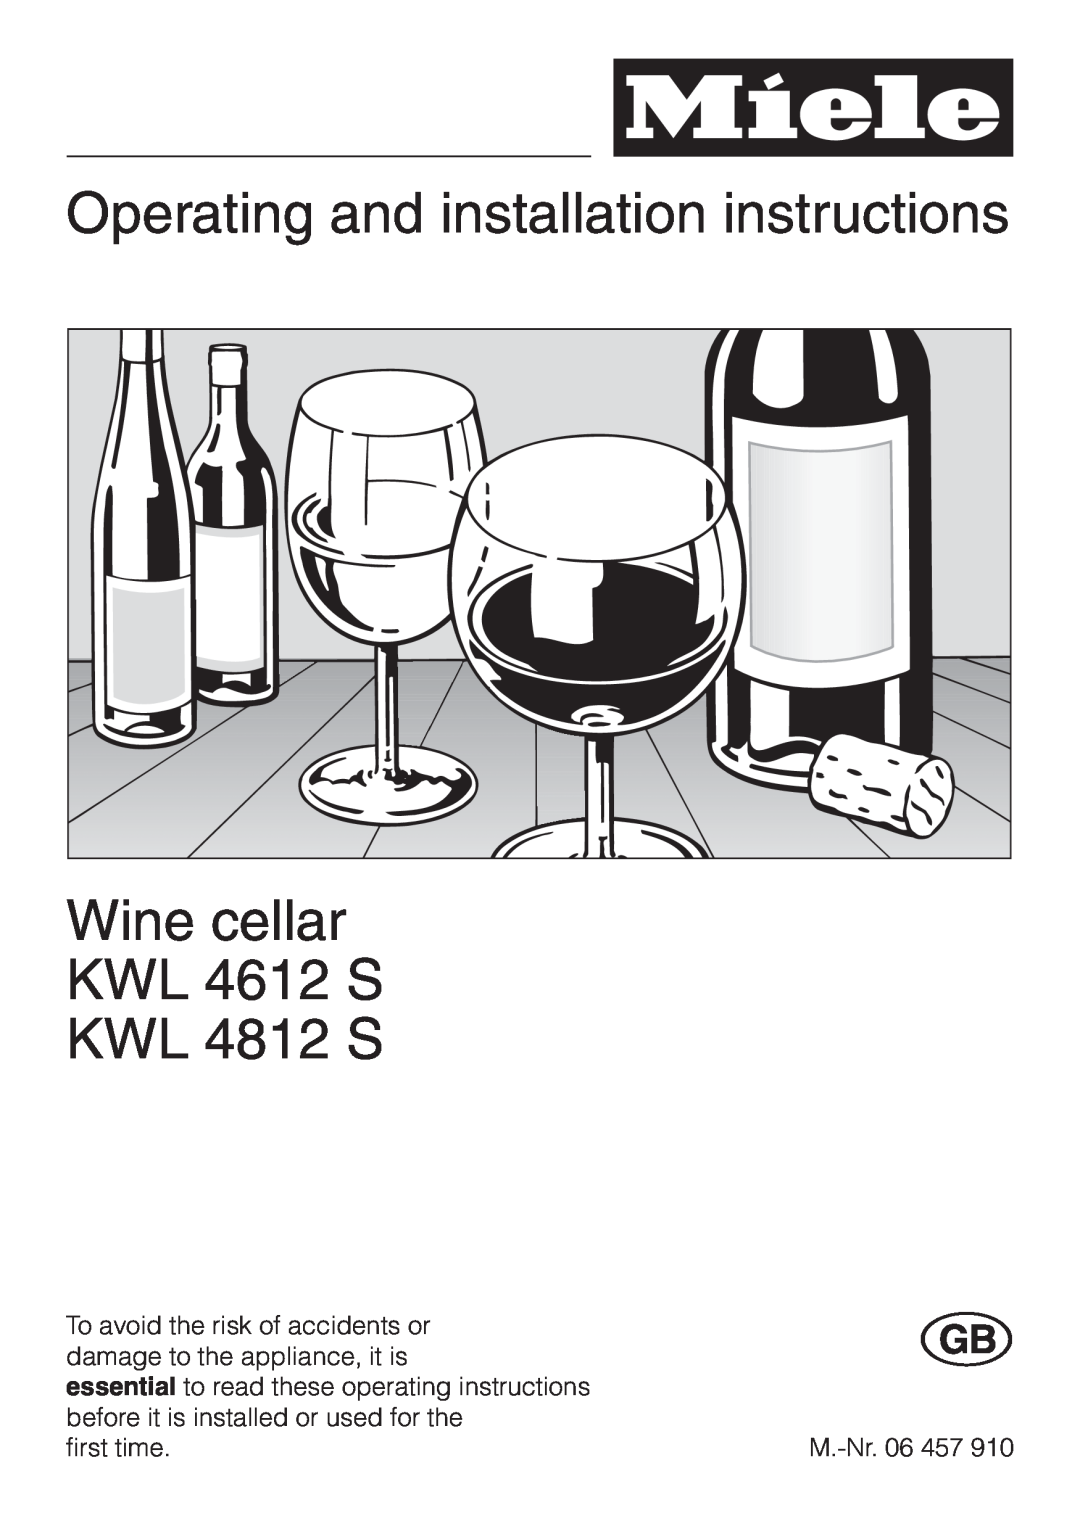 Miele installation instructions Operating and installation instructions, Wine cellar KWL 4612 S KWL 4812 S 